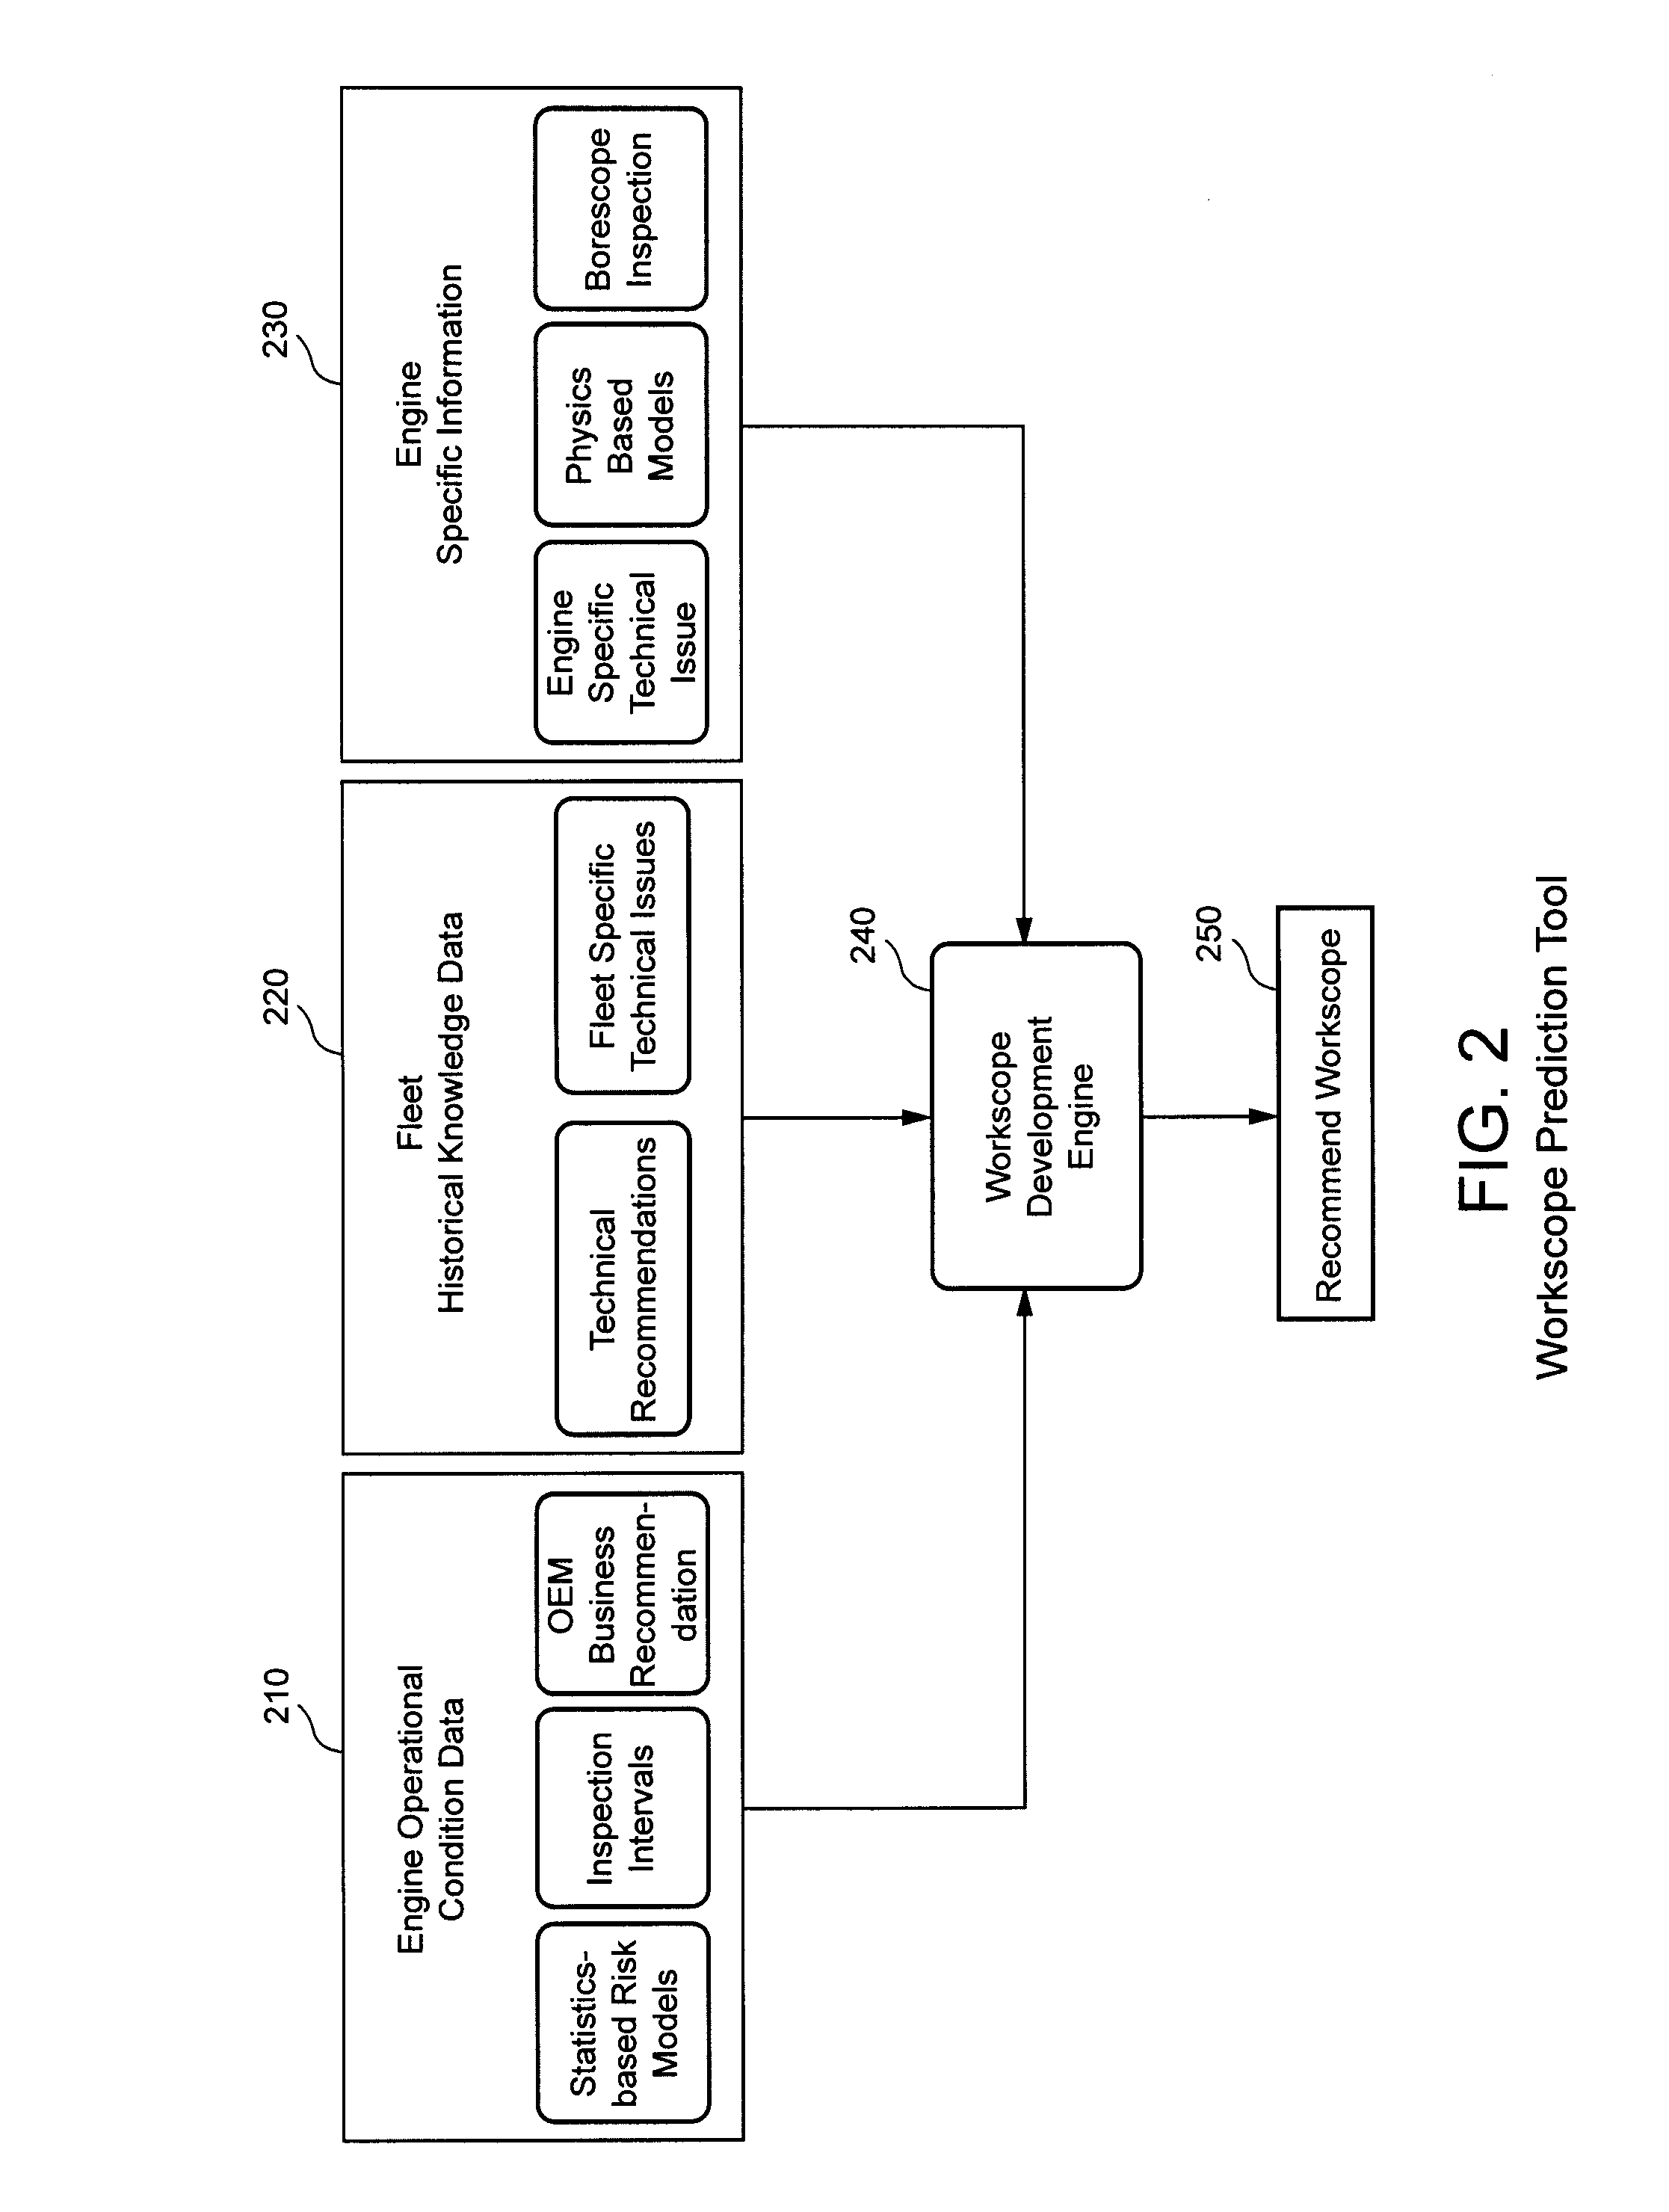 Method, System and Program Product for Intelligent Prediction of Industrial Gas Turbine Maintenance Workscope